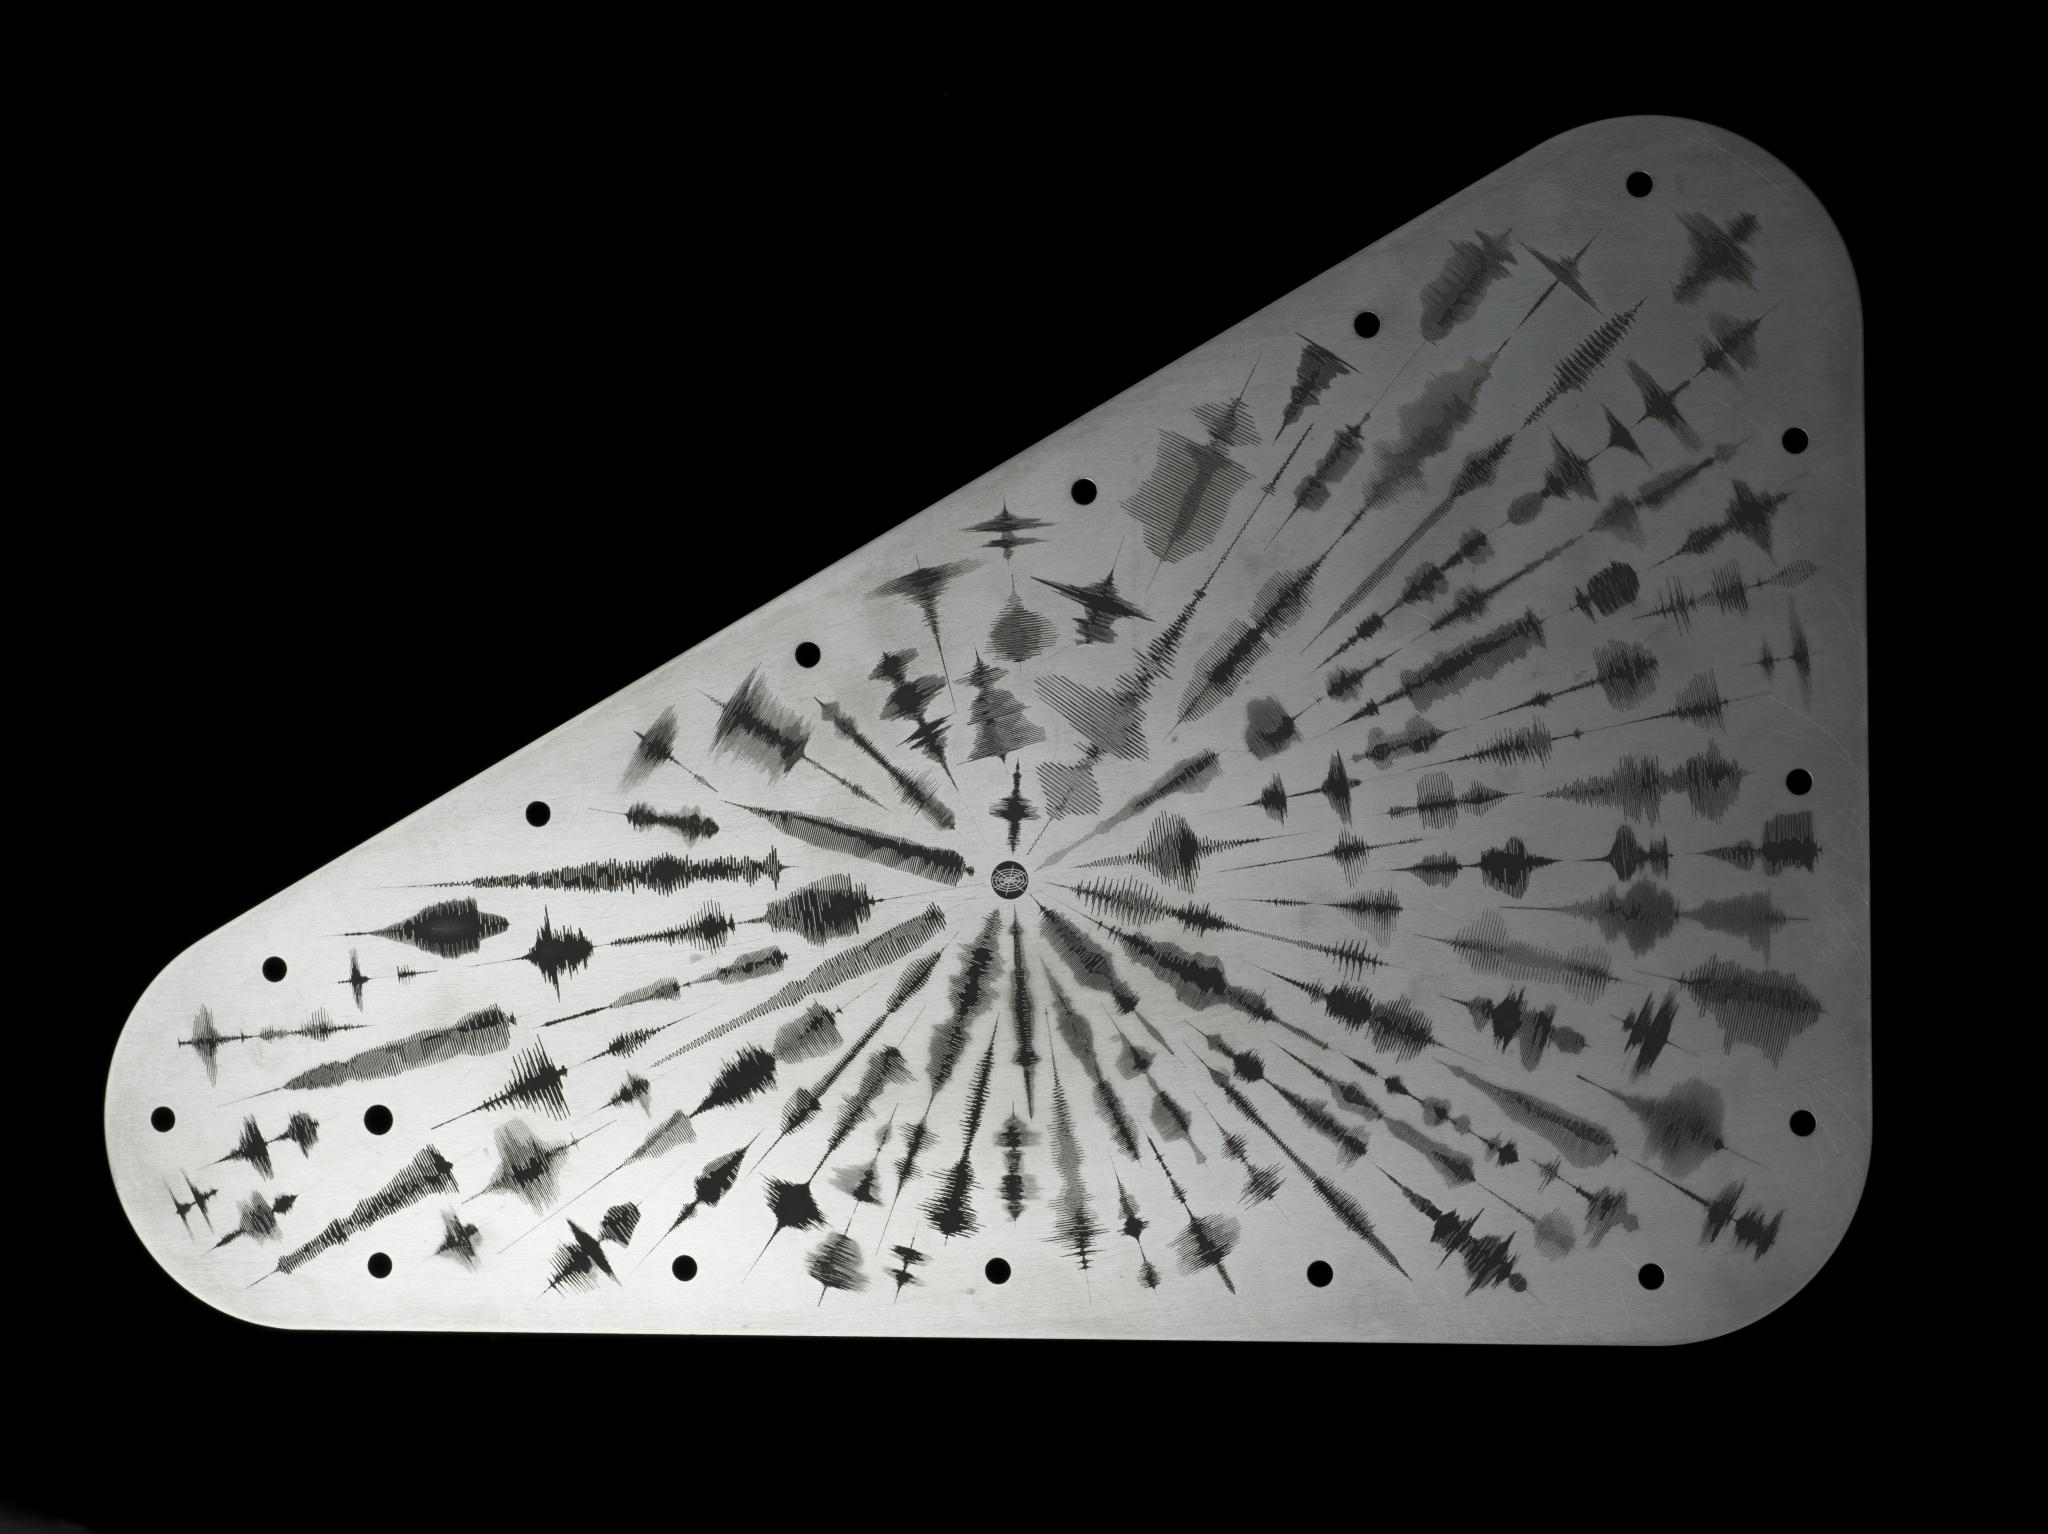 A triangle-shaped metal plate with rounded edges against a black background. The silver-colored plate has waveforms, visual representation of sound waves, radiating out from a circular symbol toward the edges of the plate.